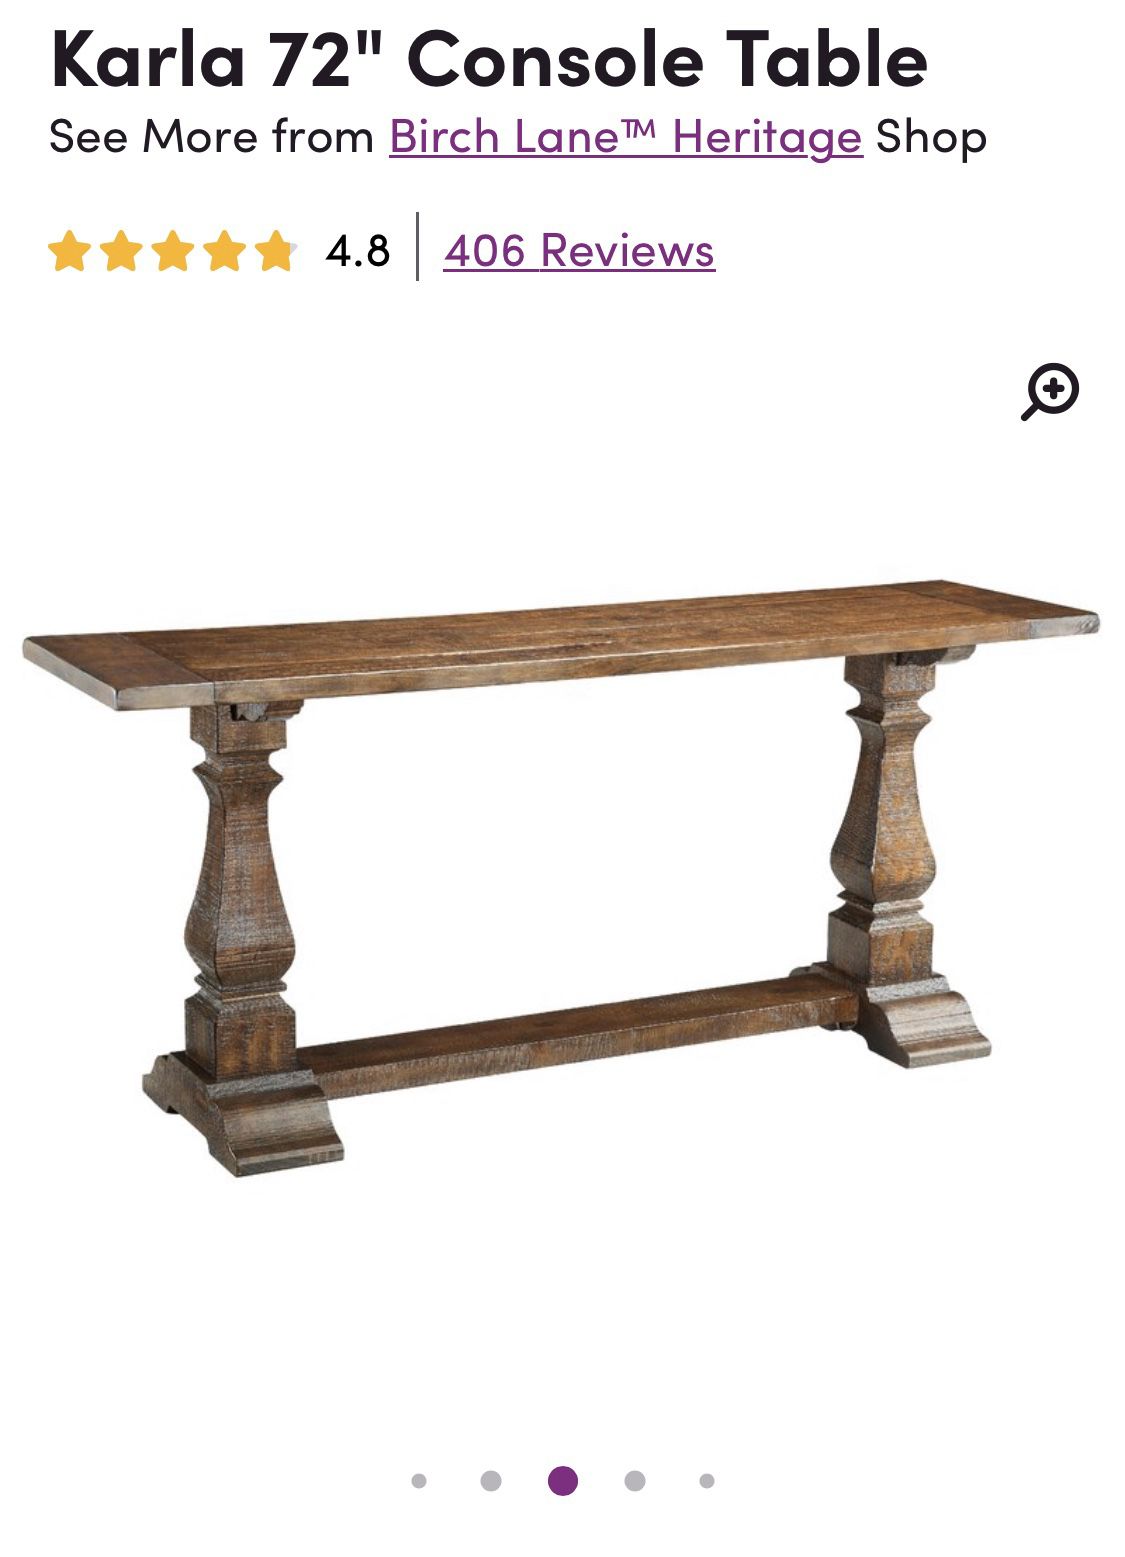 console table , front door table ,orginal price $994